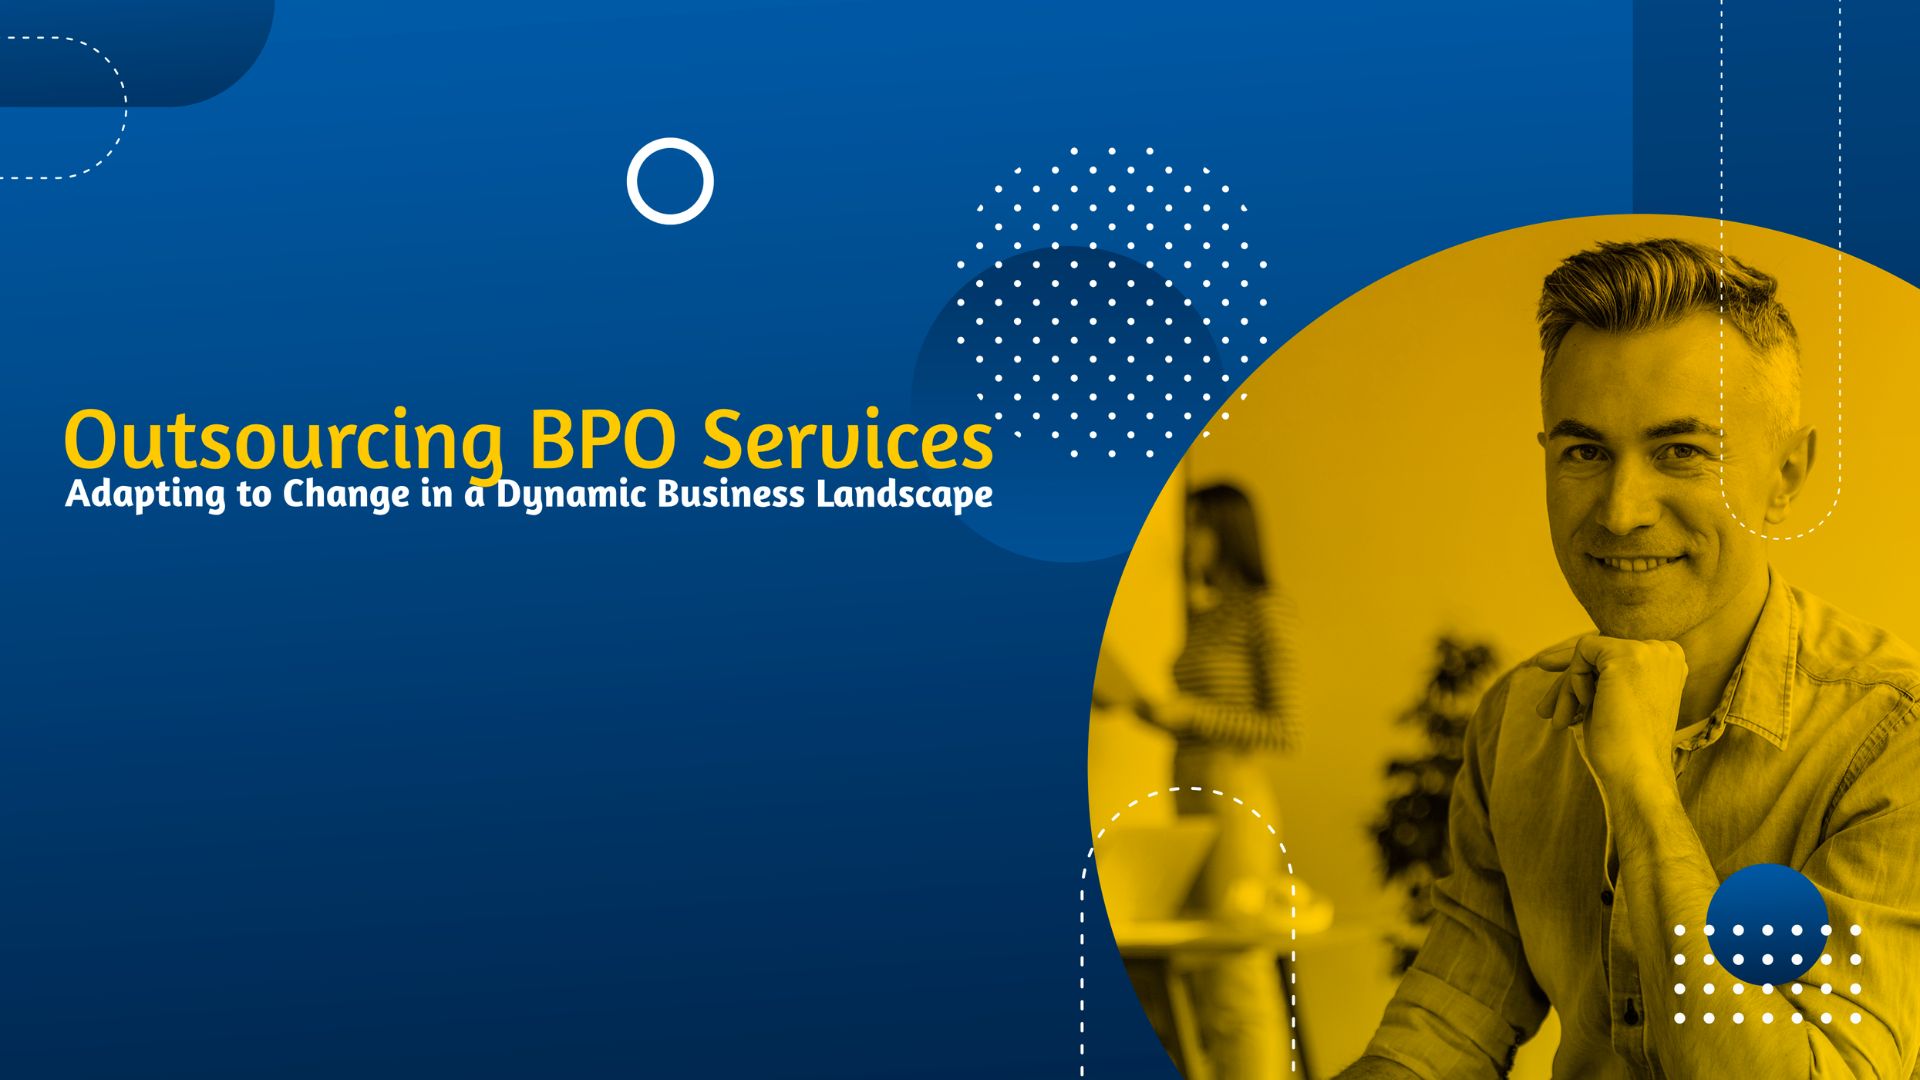 Outsourcing BPO Services: Adapting to Change in a Dynamic Business Landscape